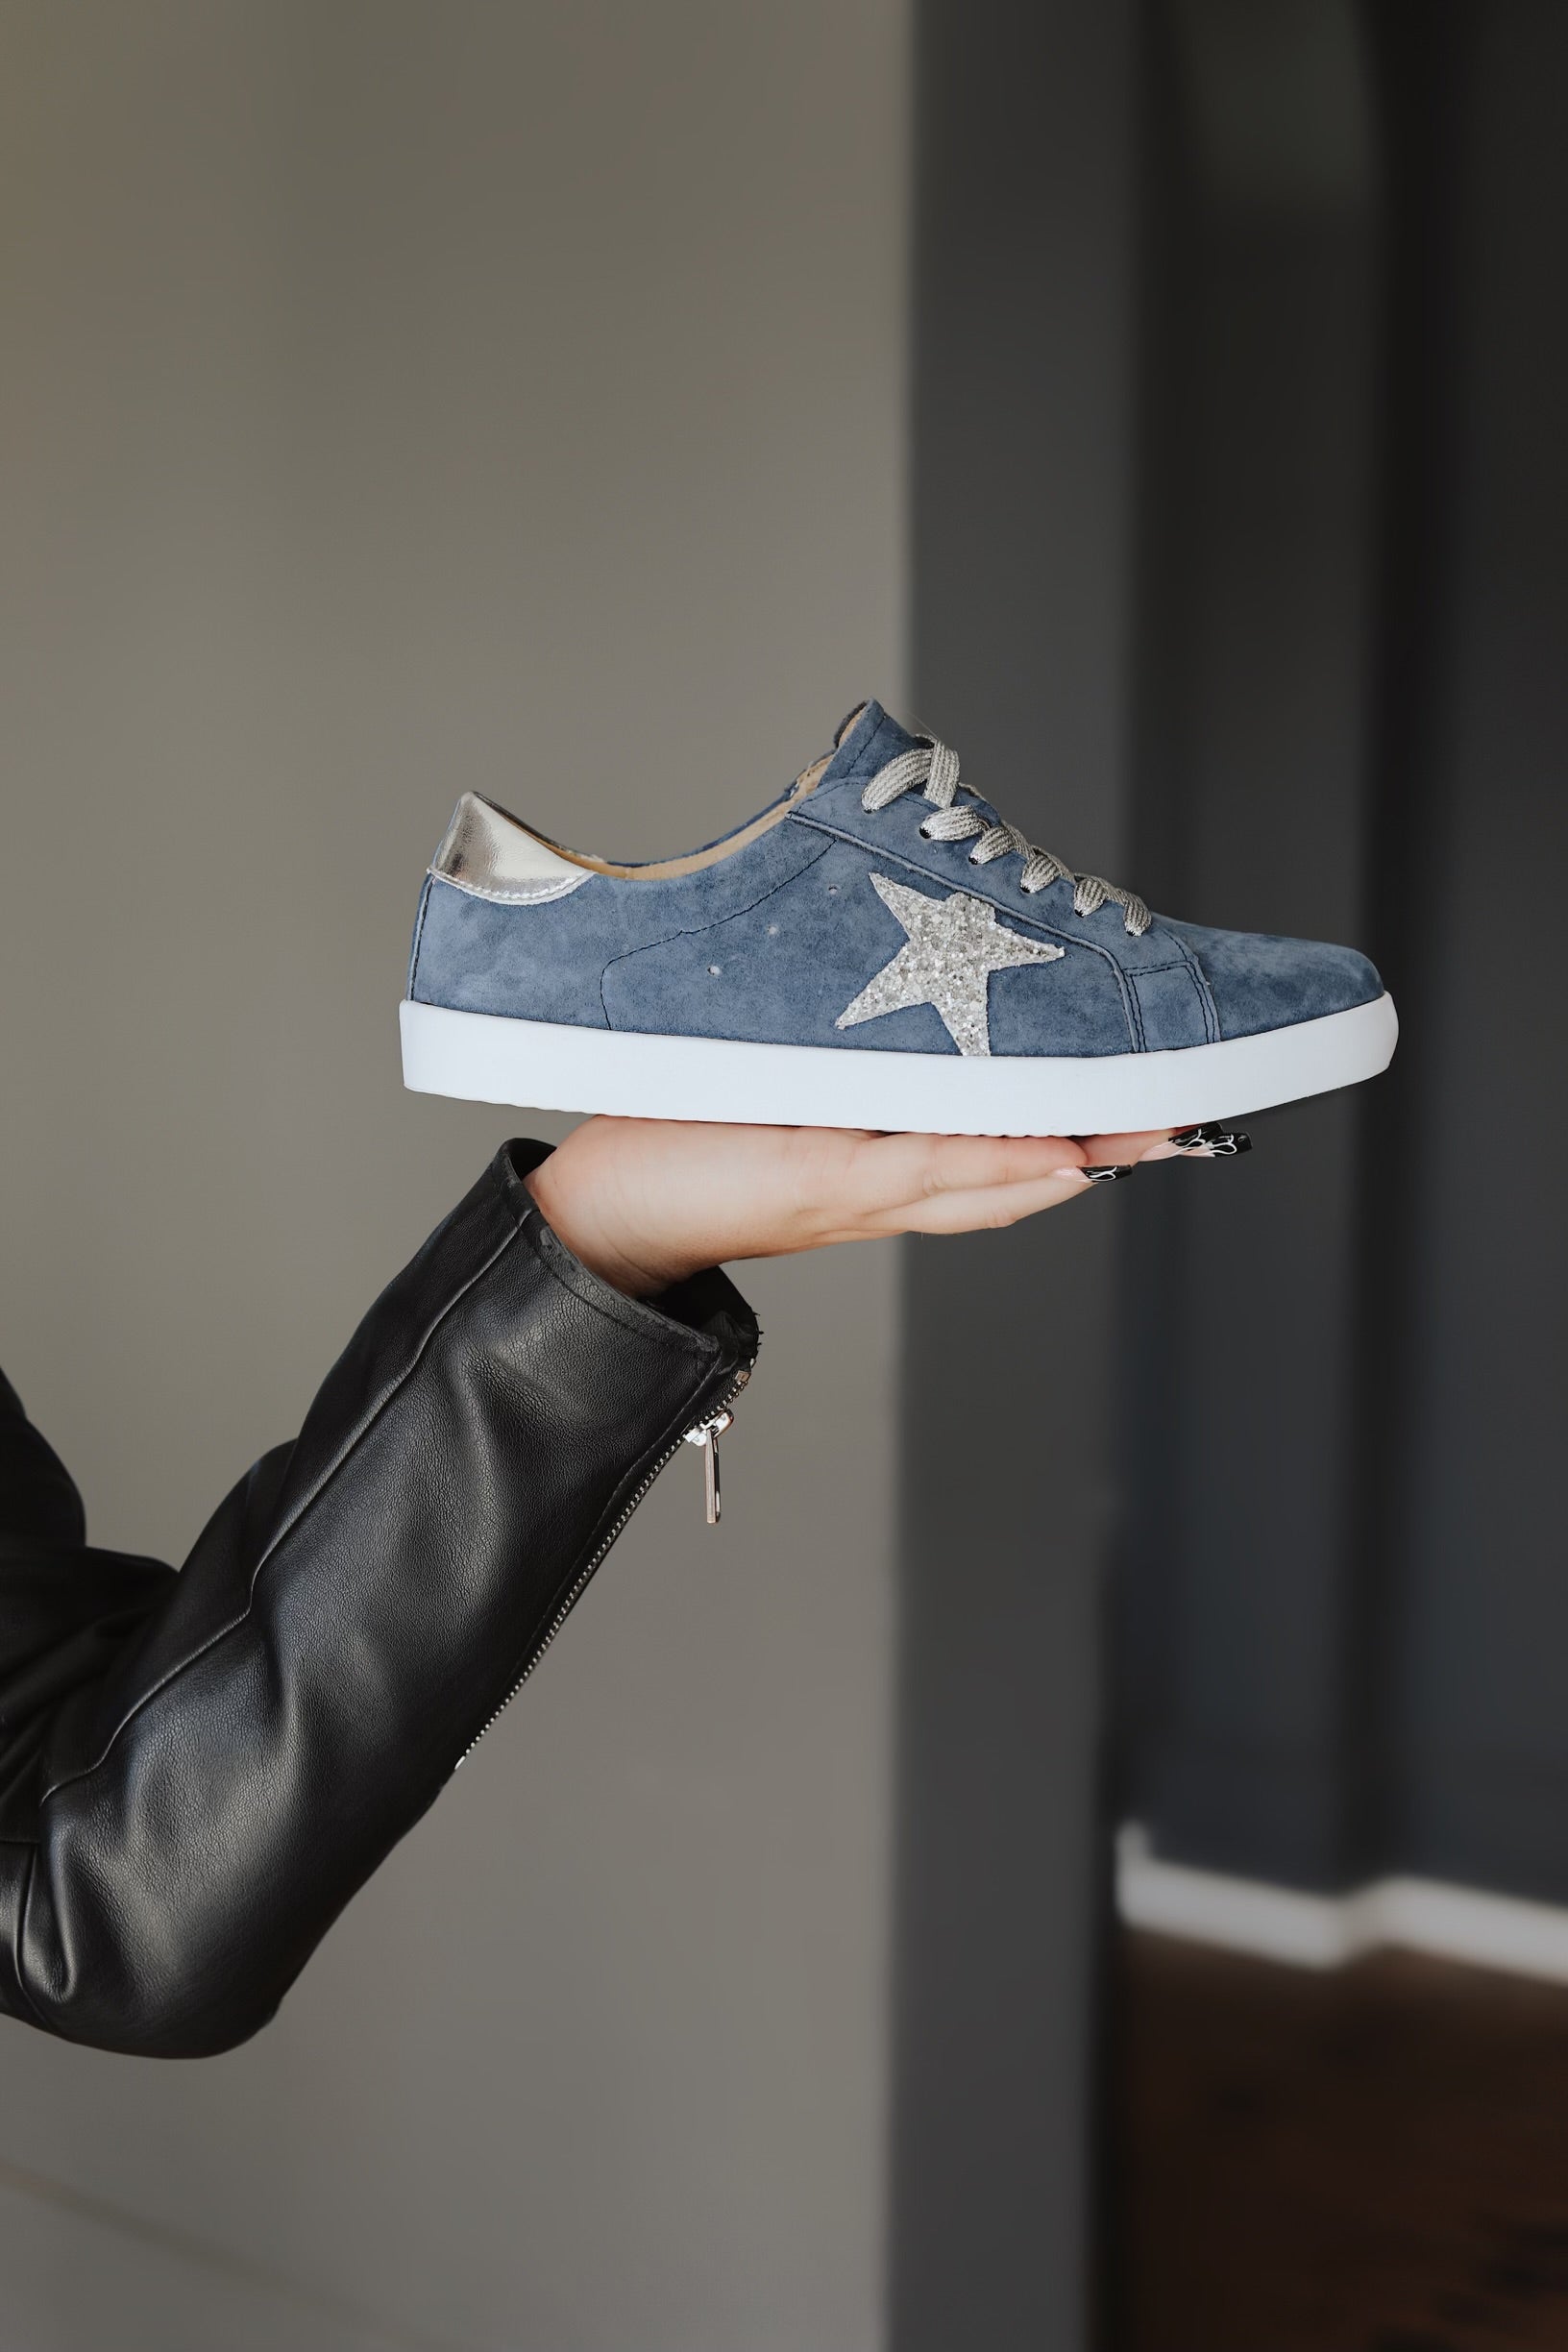 Jose Leather Sneaker With Silver Print Star In Navy